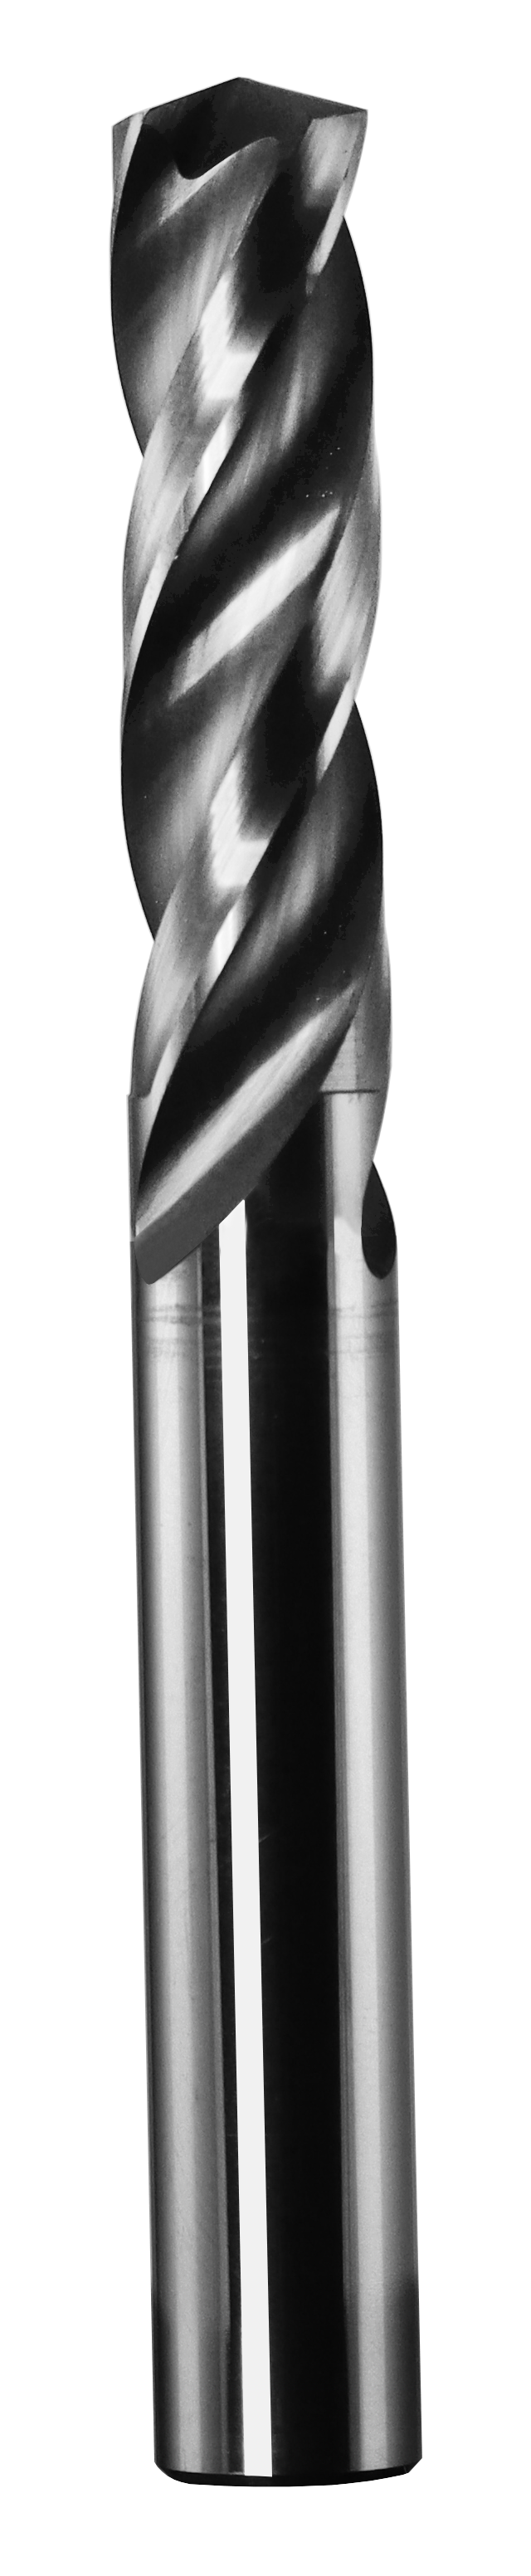 10.20mm Dia, 150 Degree Point, Solid Carbide Drill - 63027